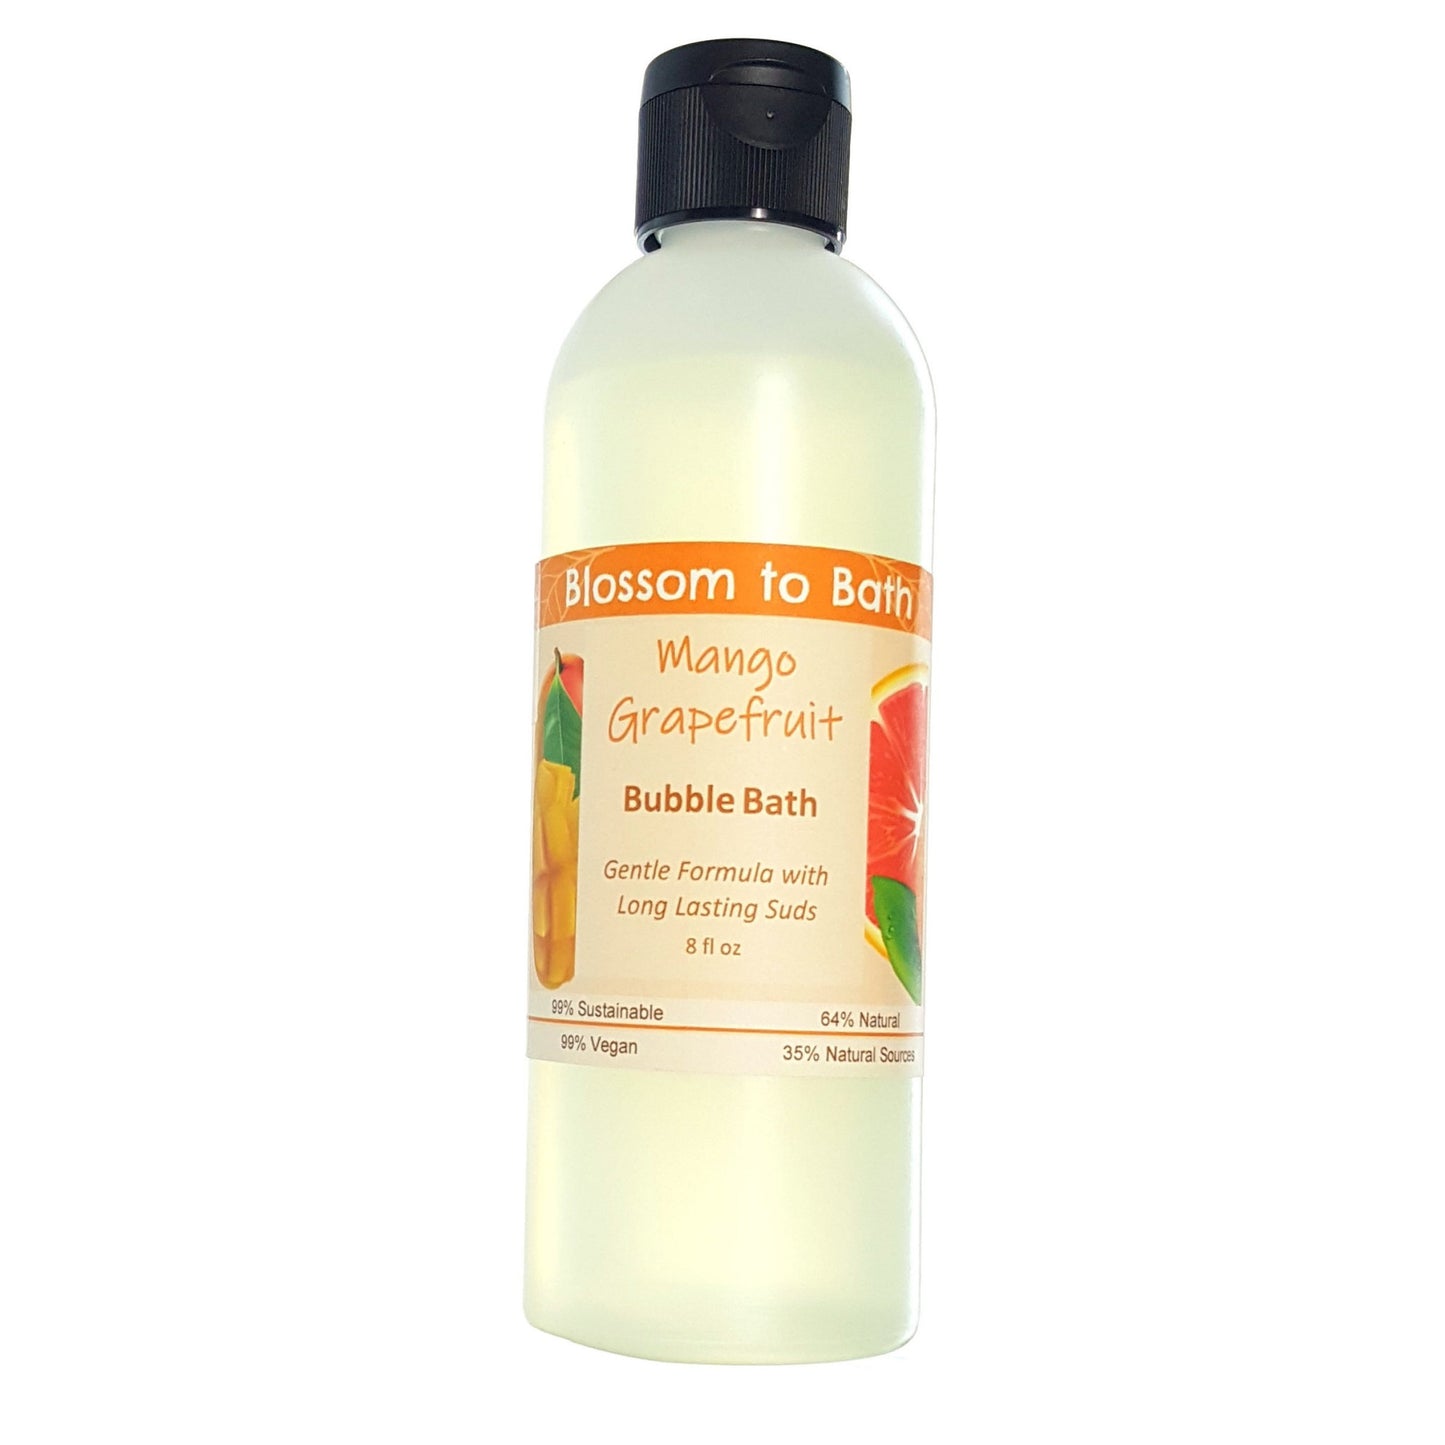 Buy Blossom to Bath Mango Grapefruit Bubble Bath from Flowersong Soap Studio.  Lively, long lasting luxury bubbles in a gentle plant based formula for maximum relaxation time  Exotic tropical fruits in a powdery puff of sophisticated freshness.